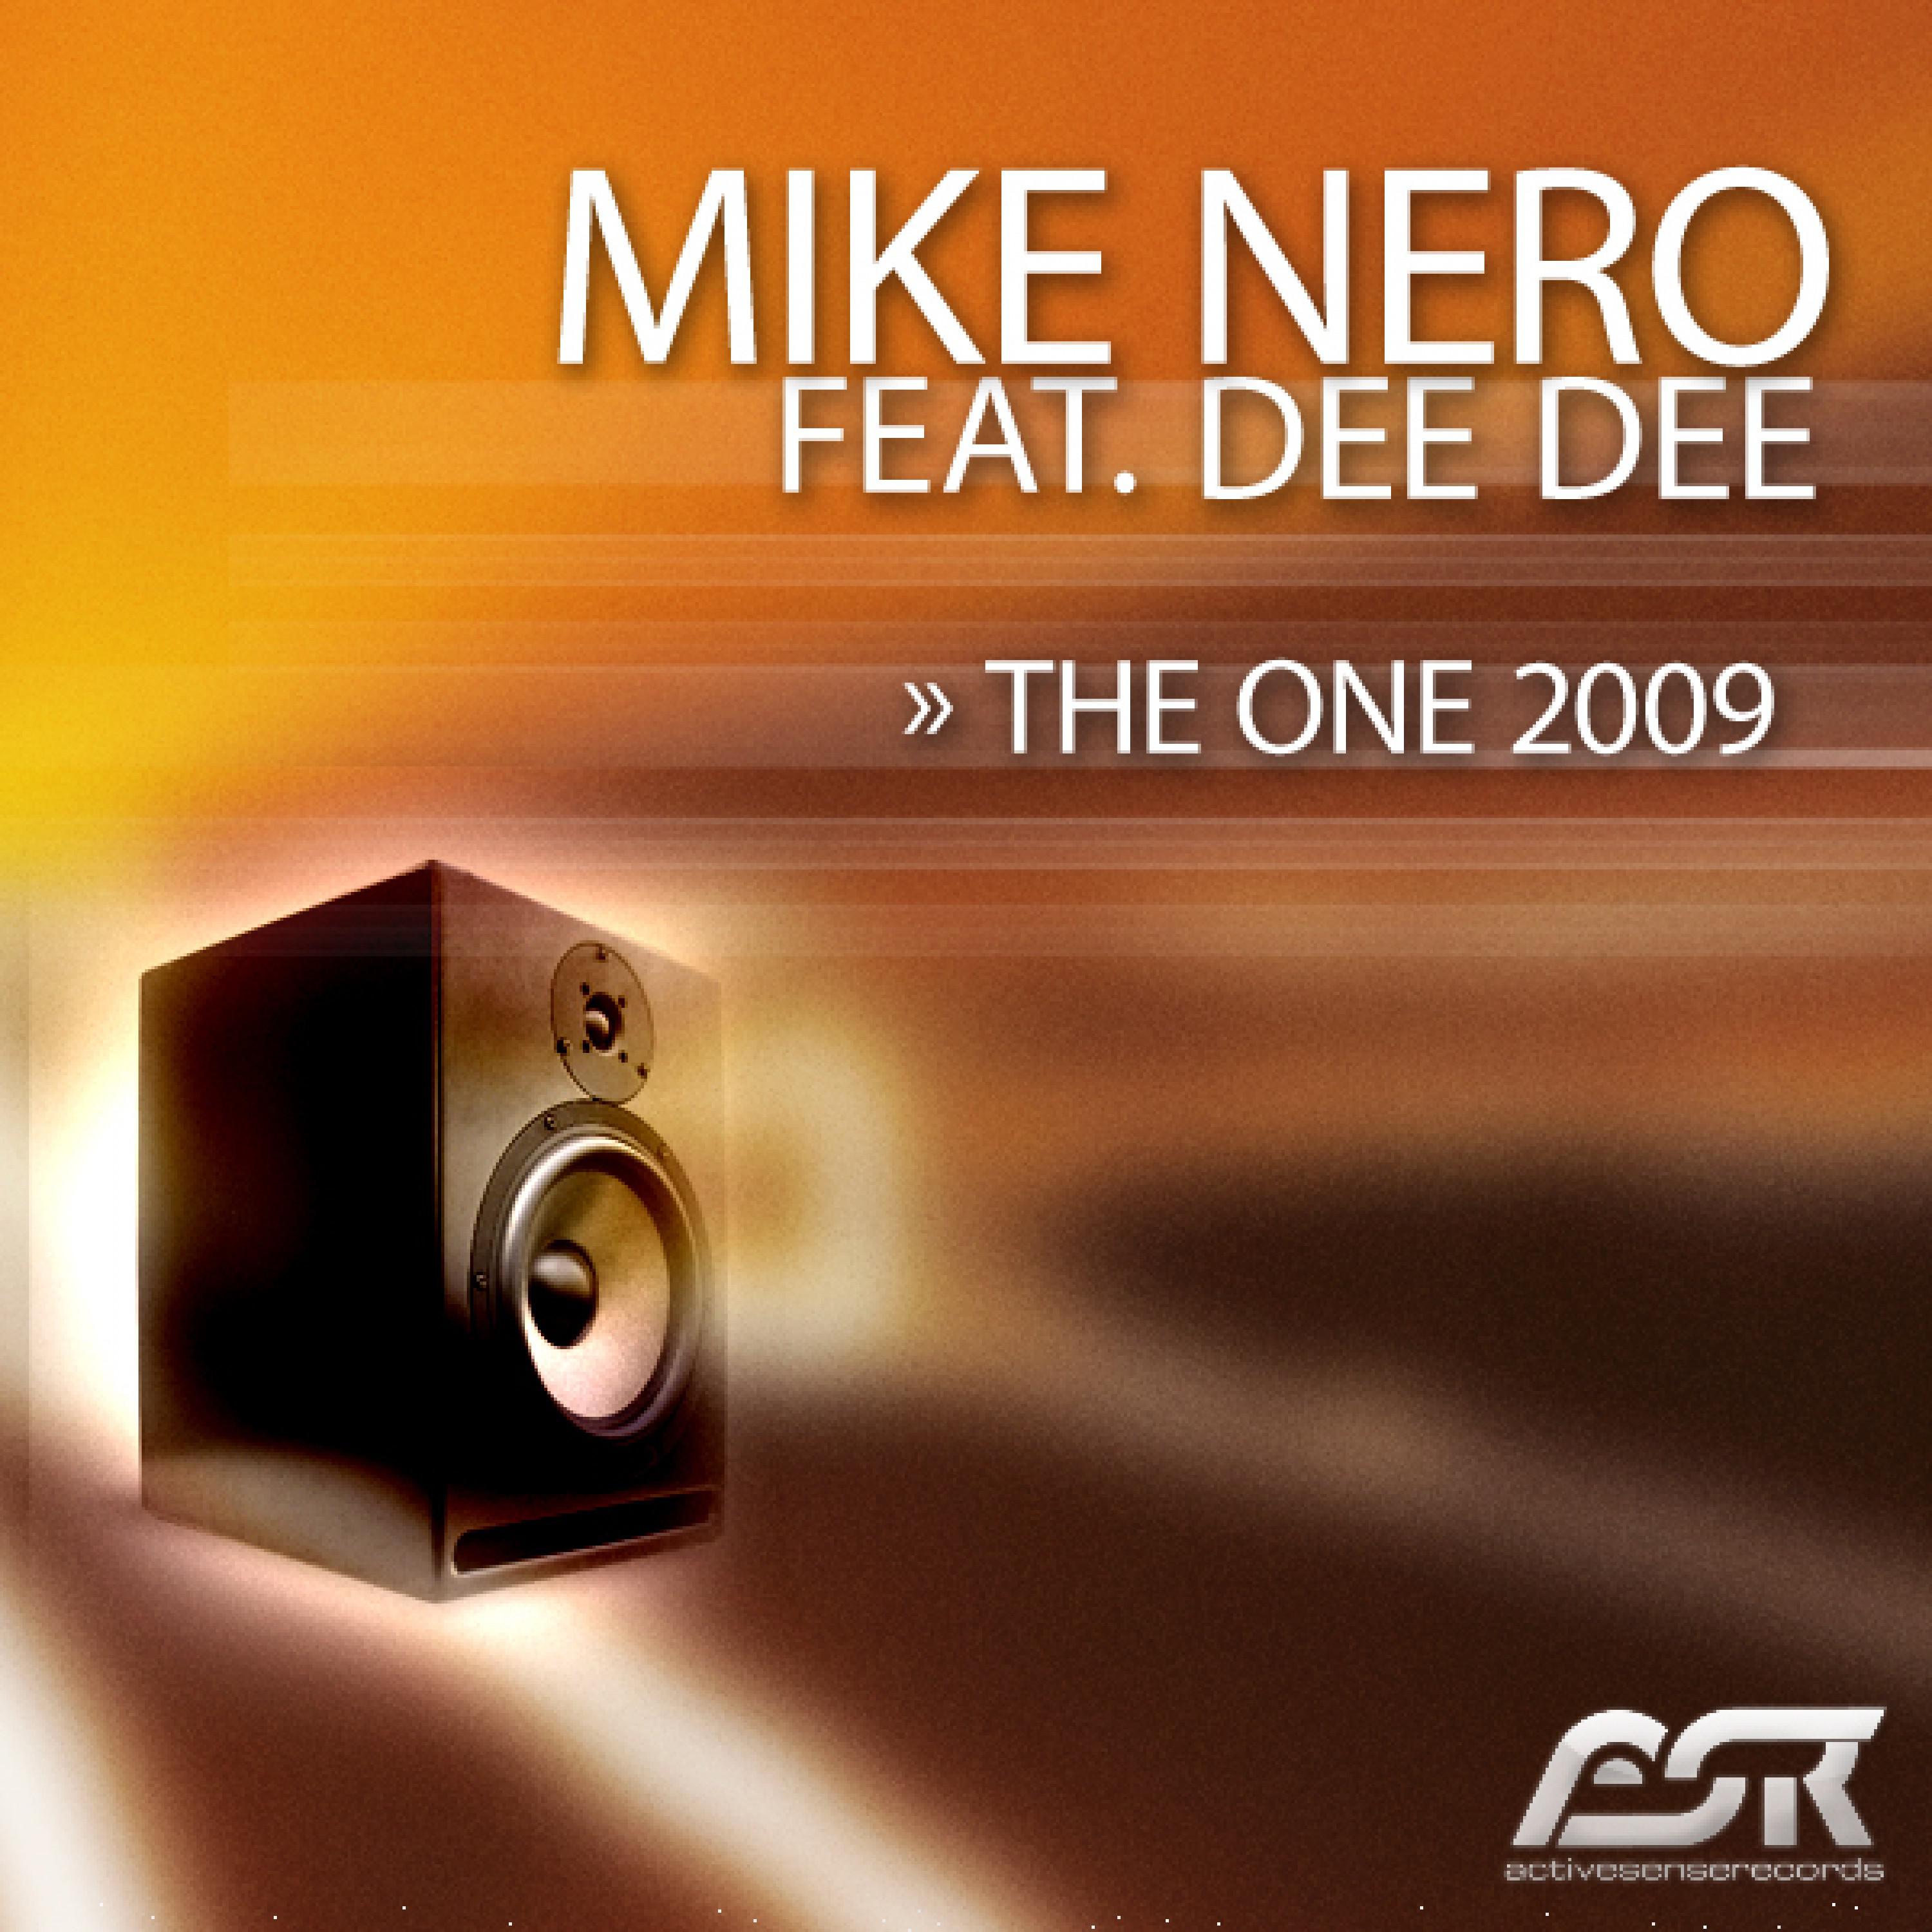 The One 2009